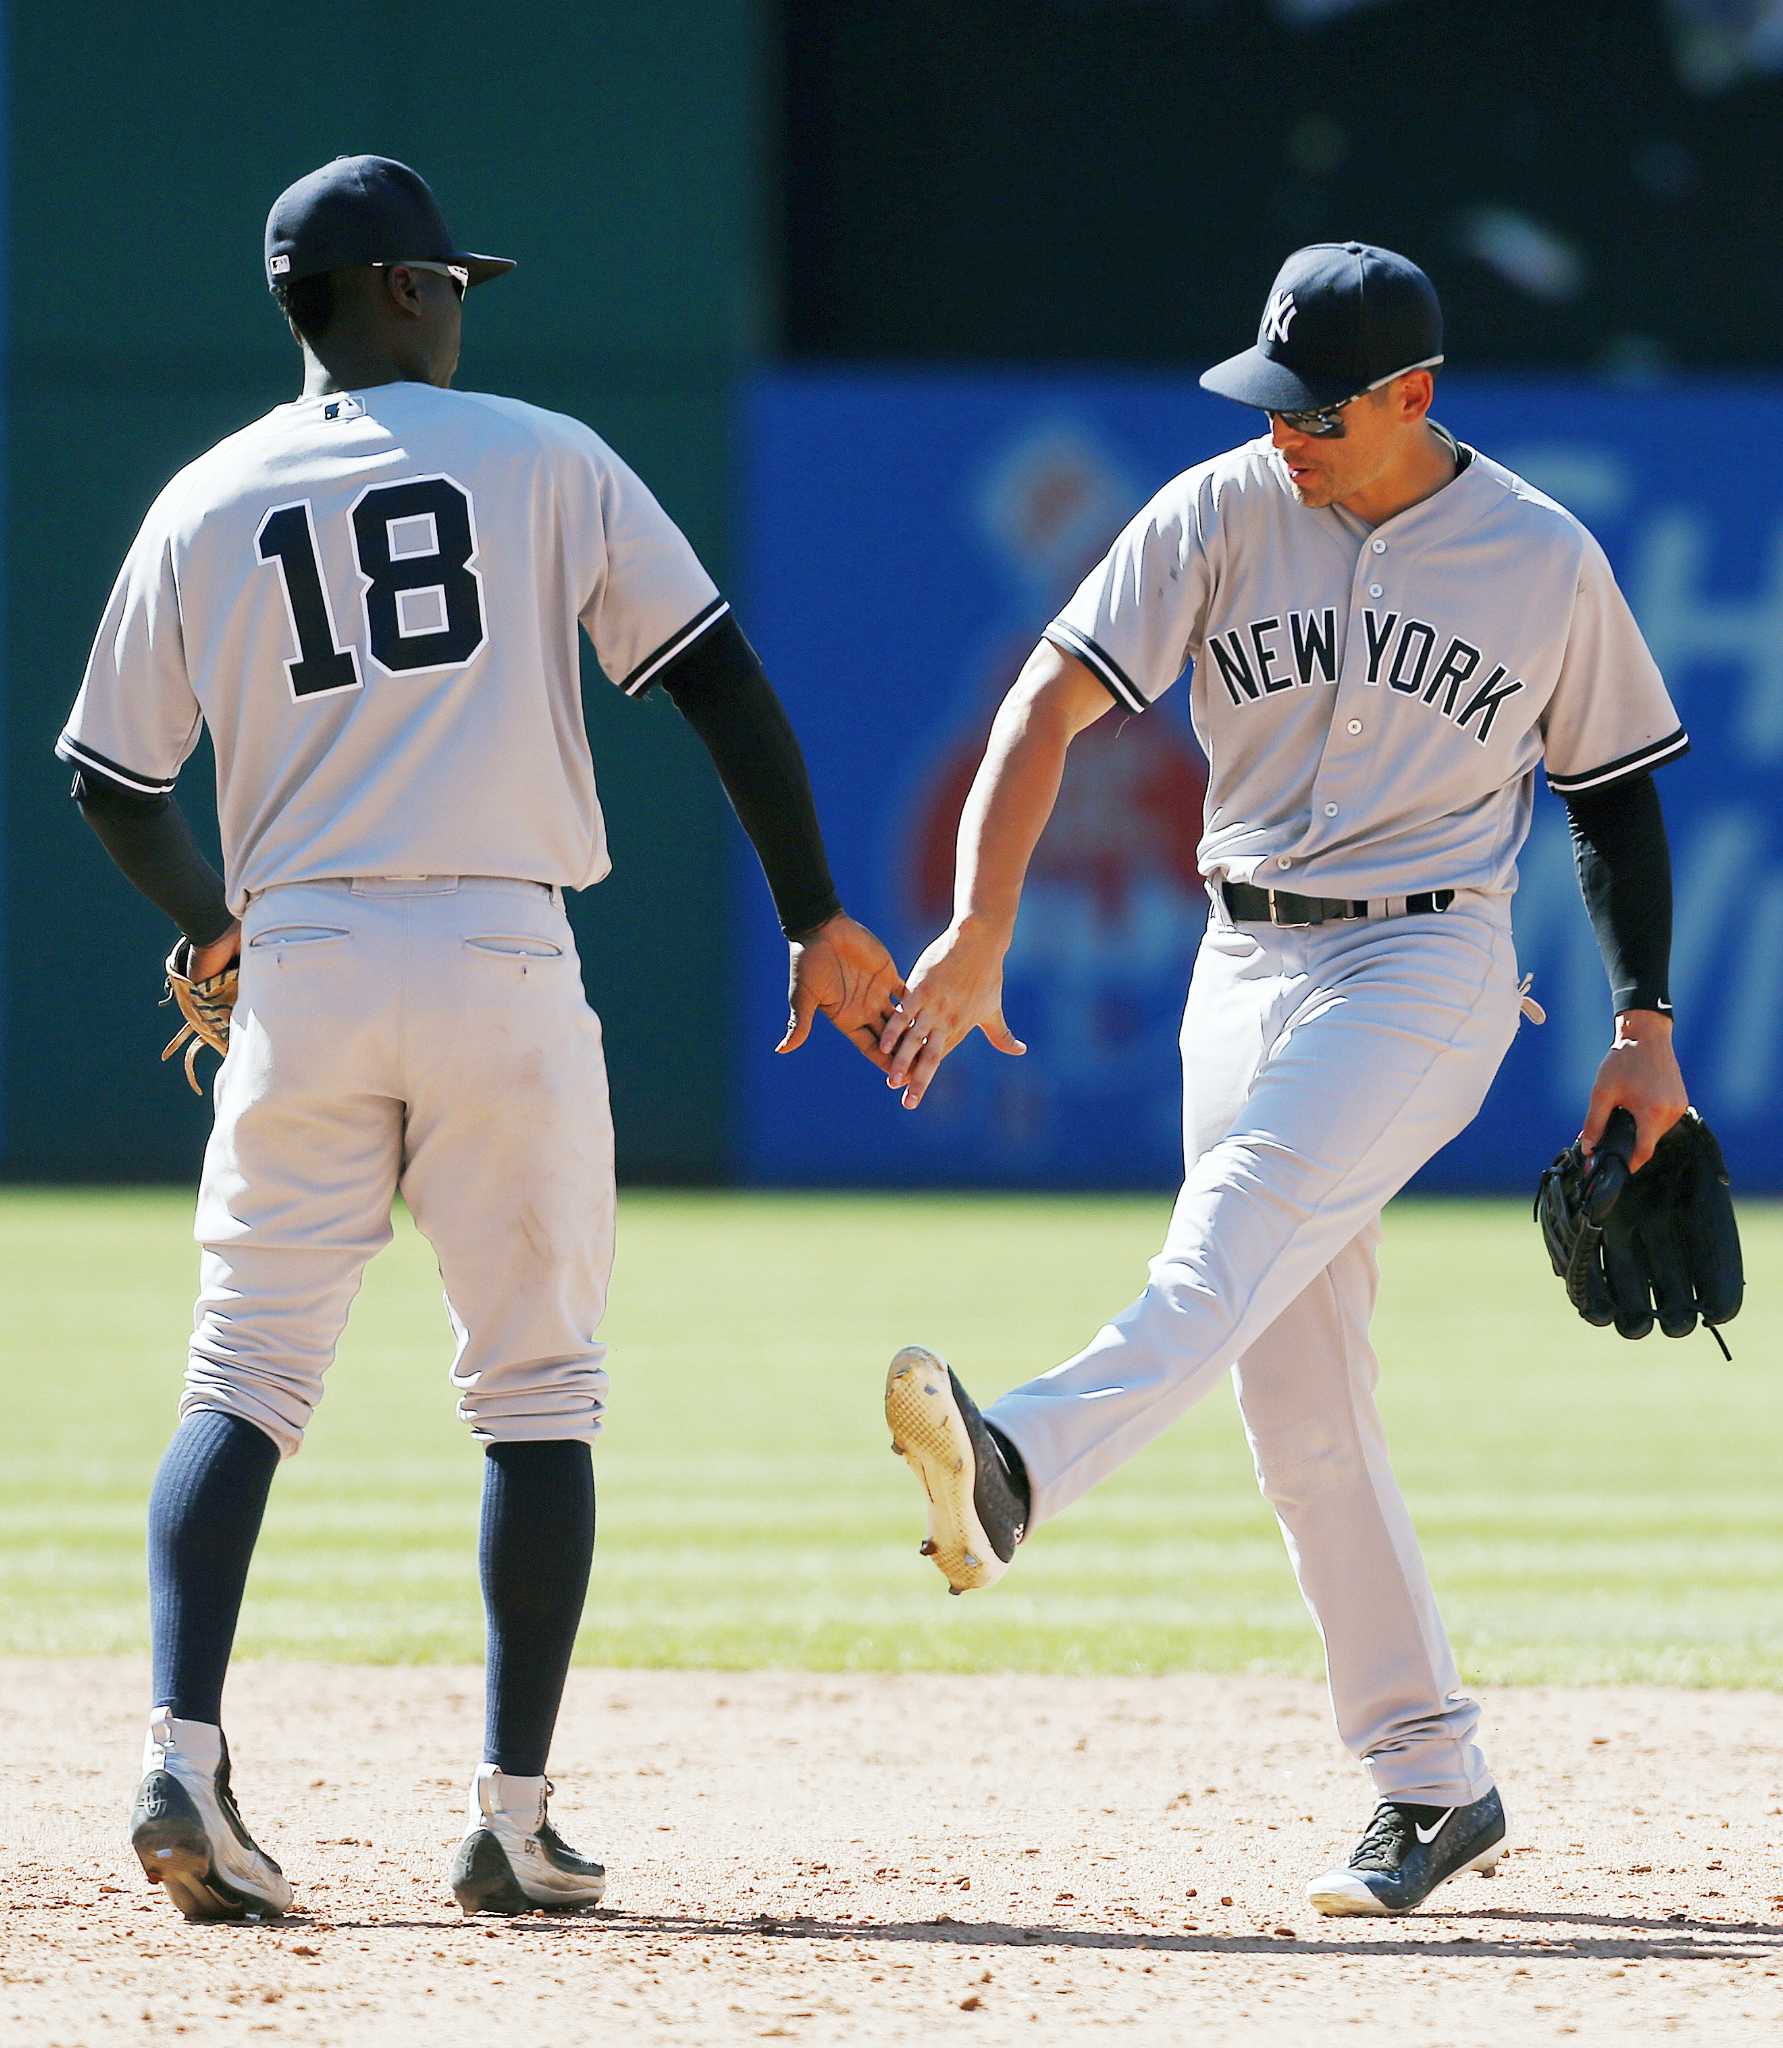 Jacoby Ellsbury's home run key in Yankees win over Indians